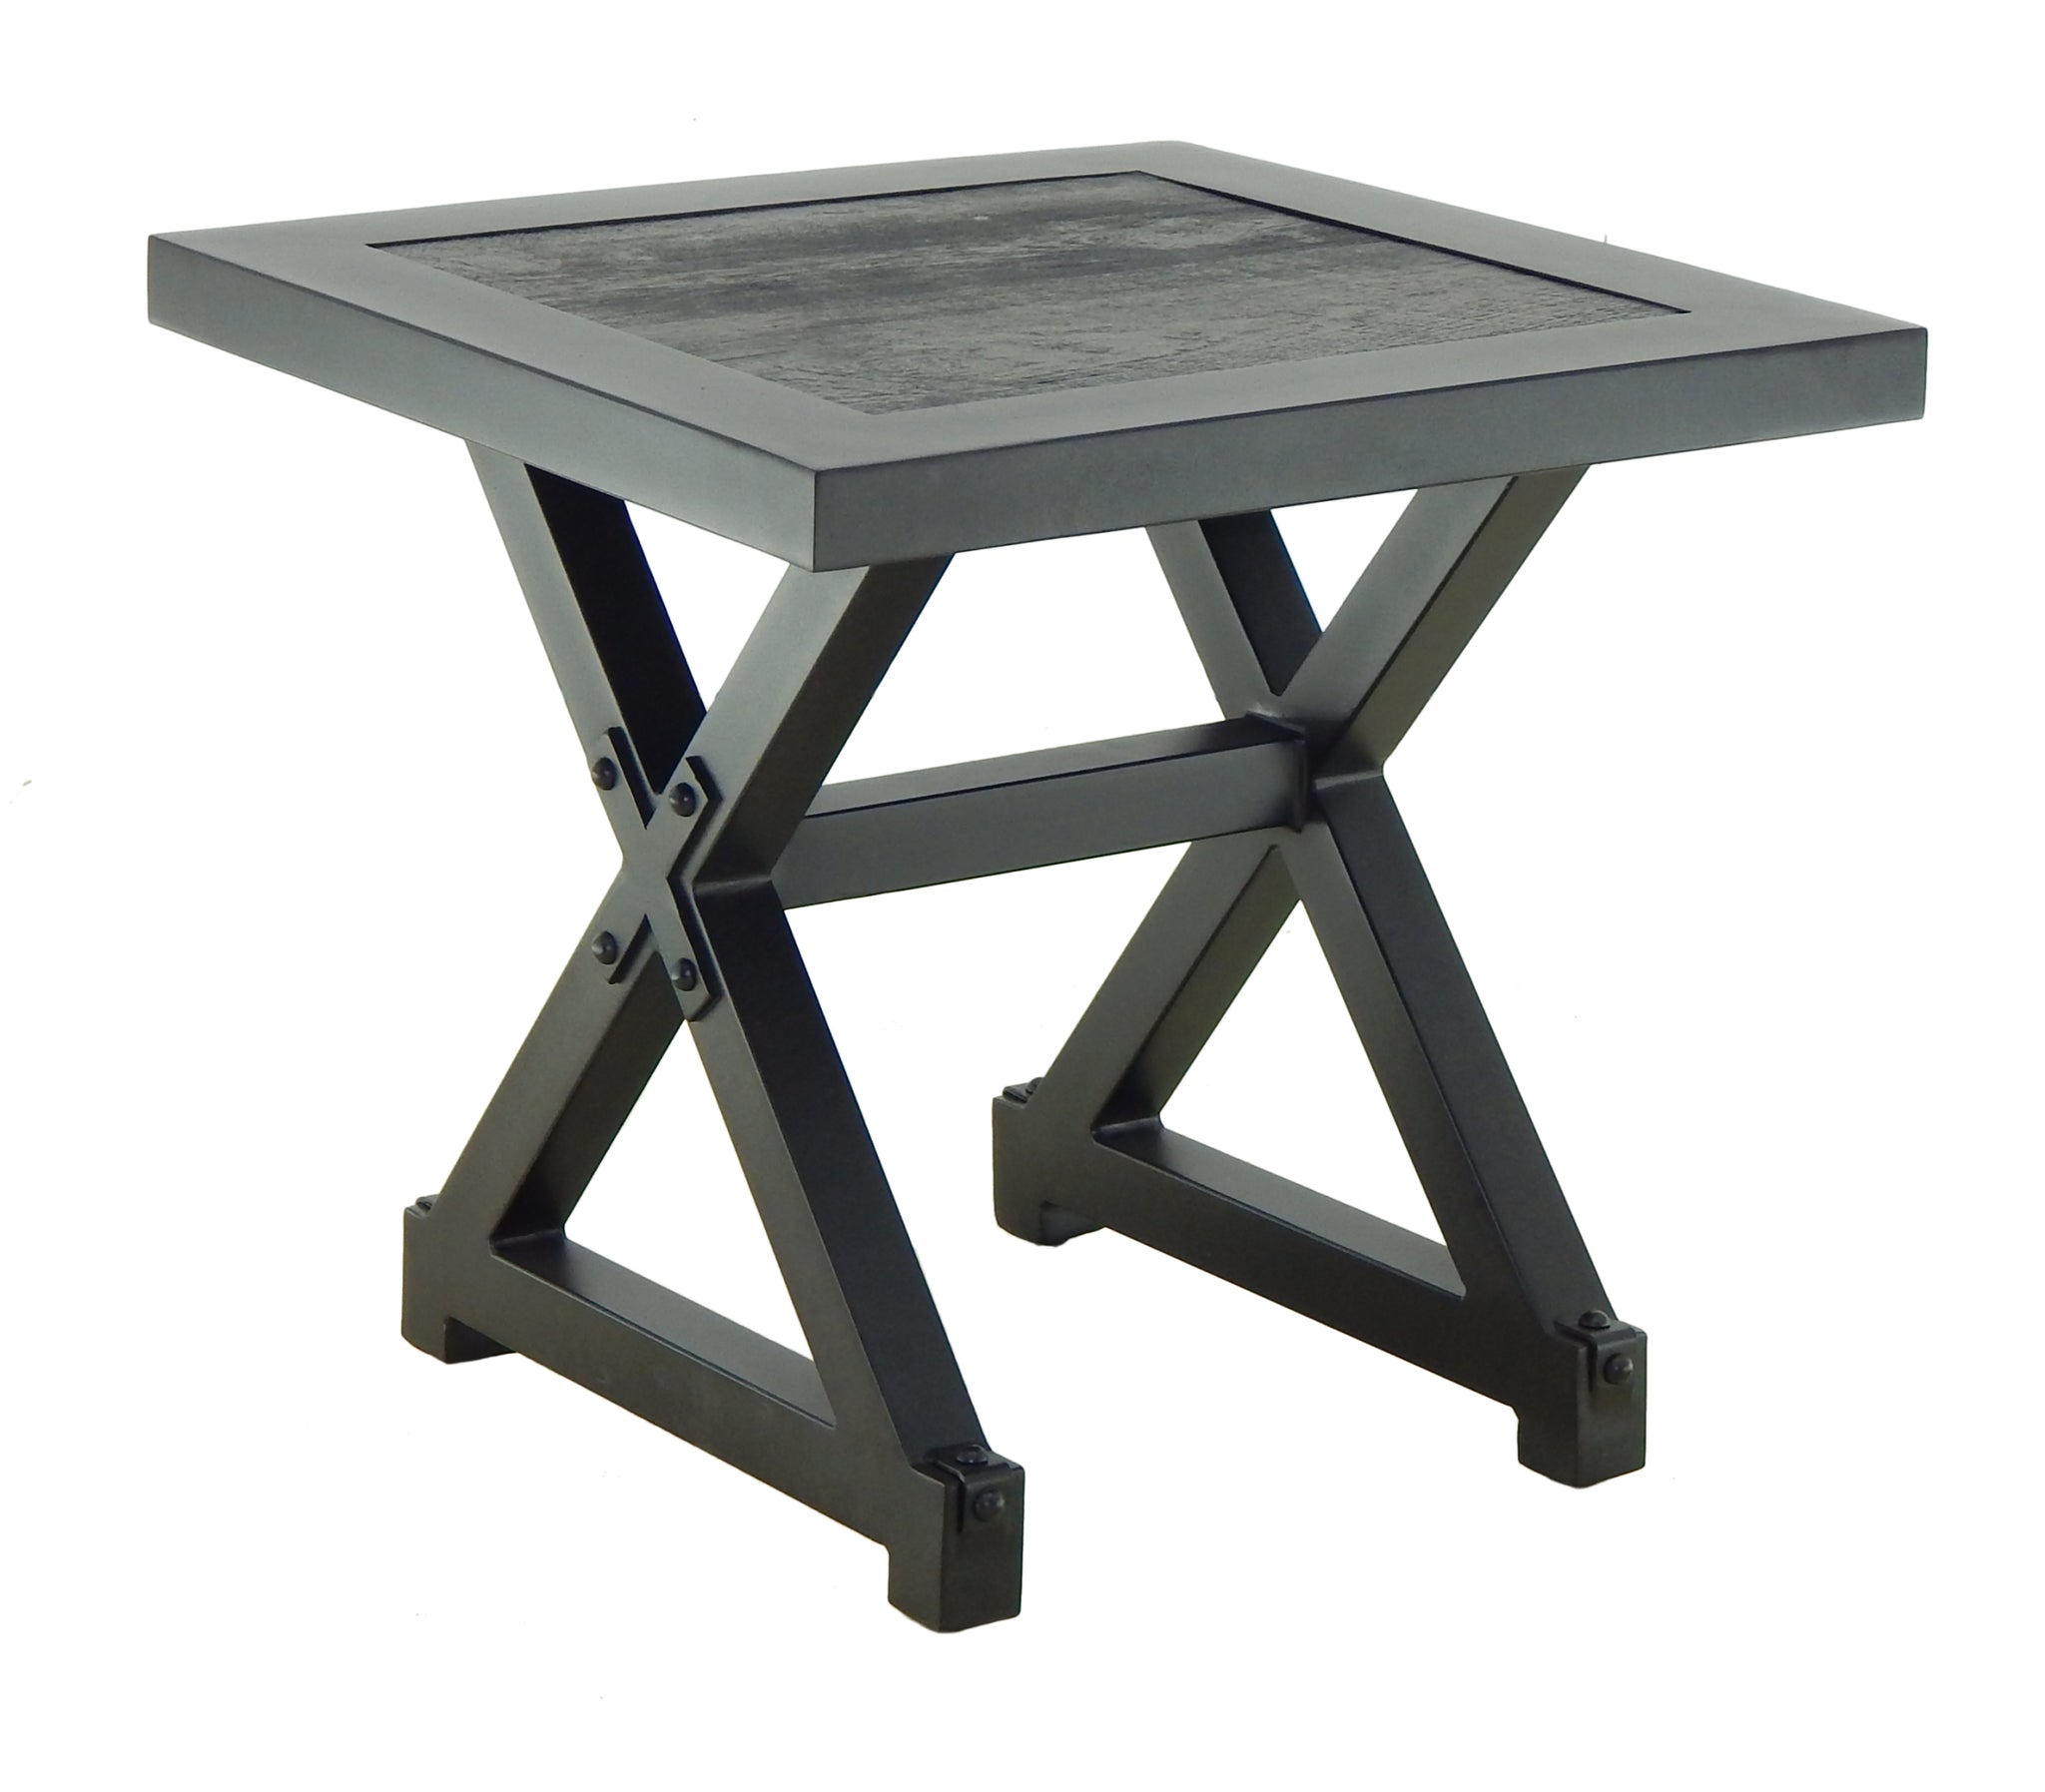 Castelle Oxford 20" Square Side Table with Polaris Aluminum Top and Antique Dark Rum Frame 12038568